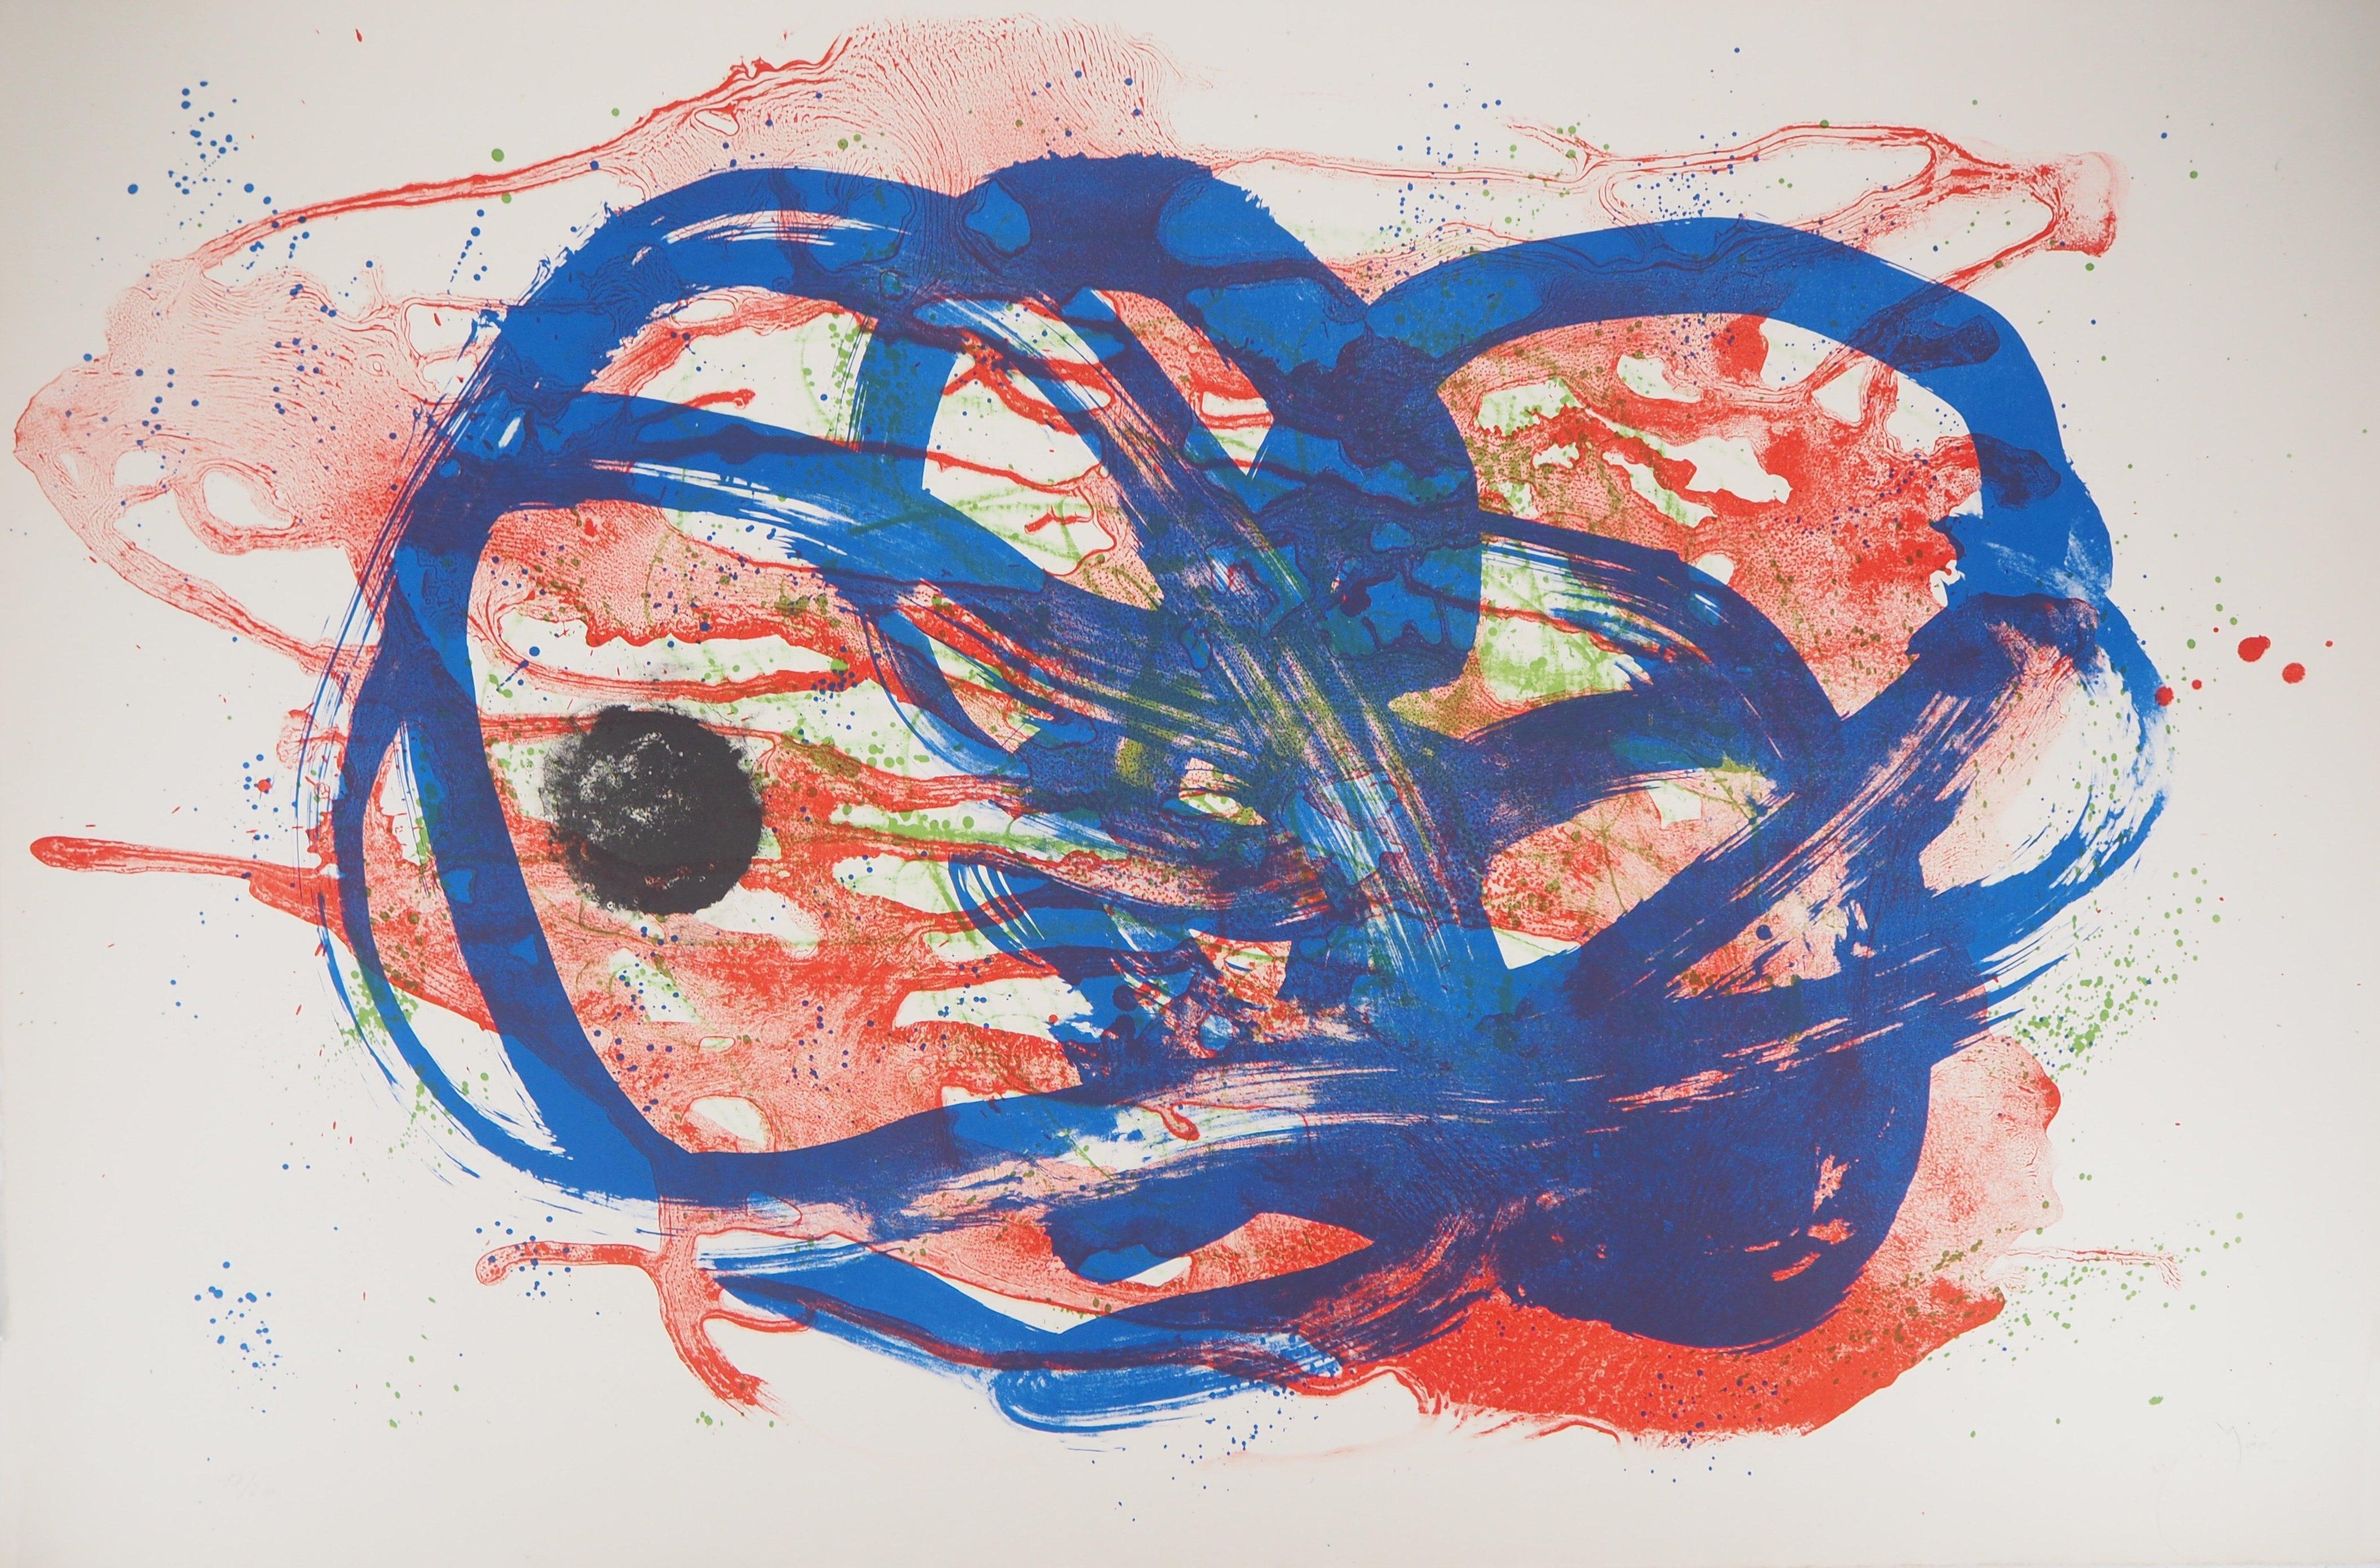 Joan Miró Abstract Print - Blue and Green on Red Wash, from Series I, Handsigned Lithograph (Mourlot #212)